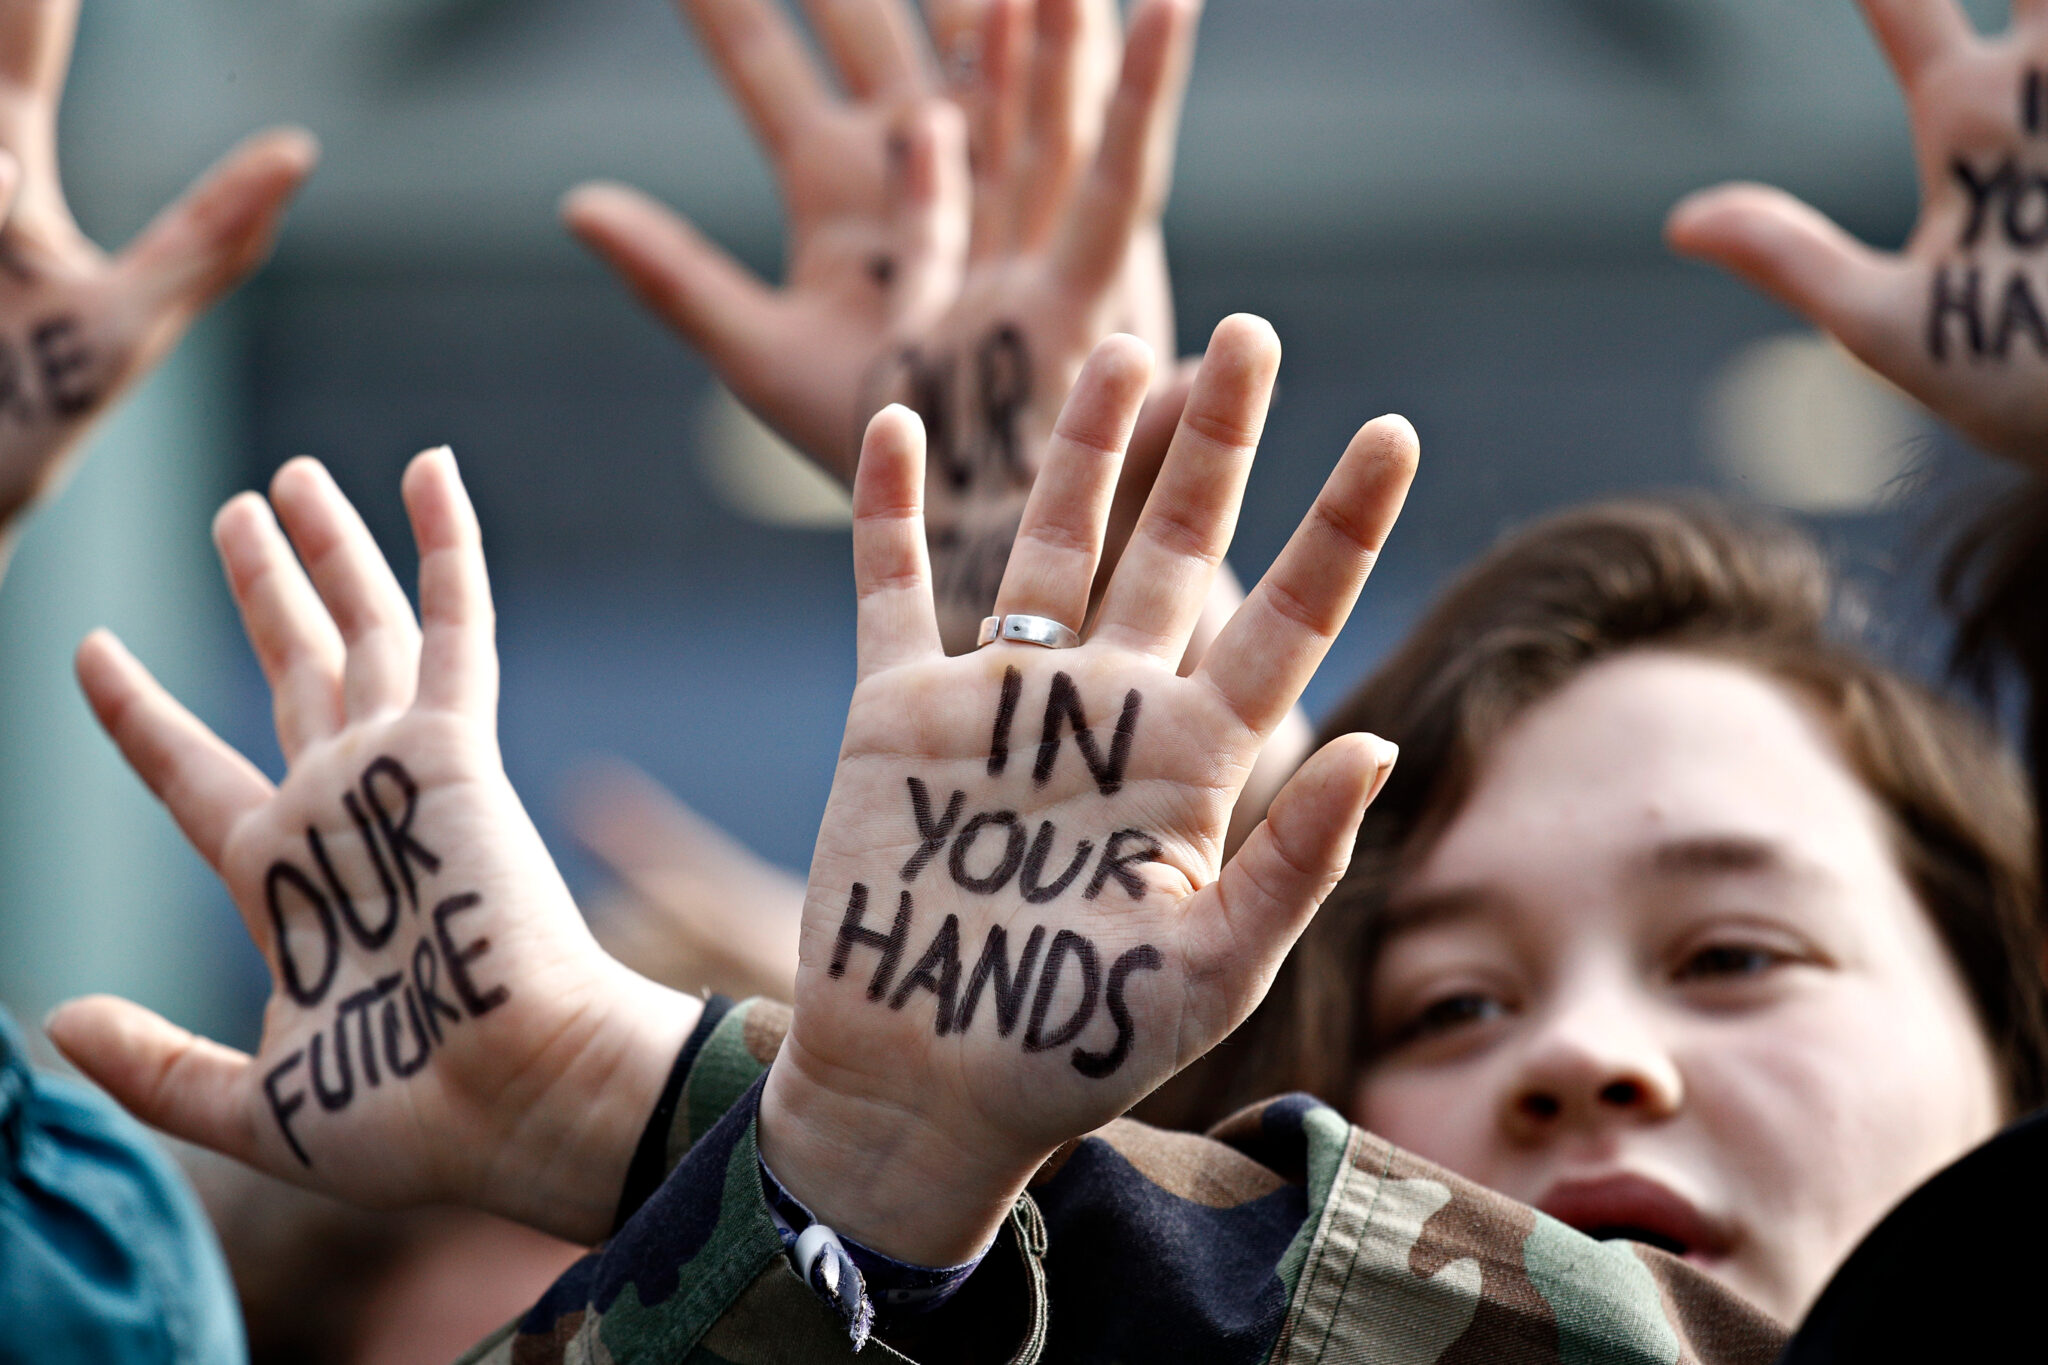 Child at protest with hands that say "our future in your hands"